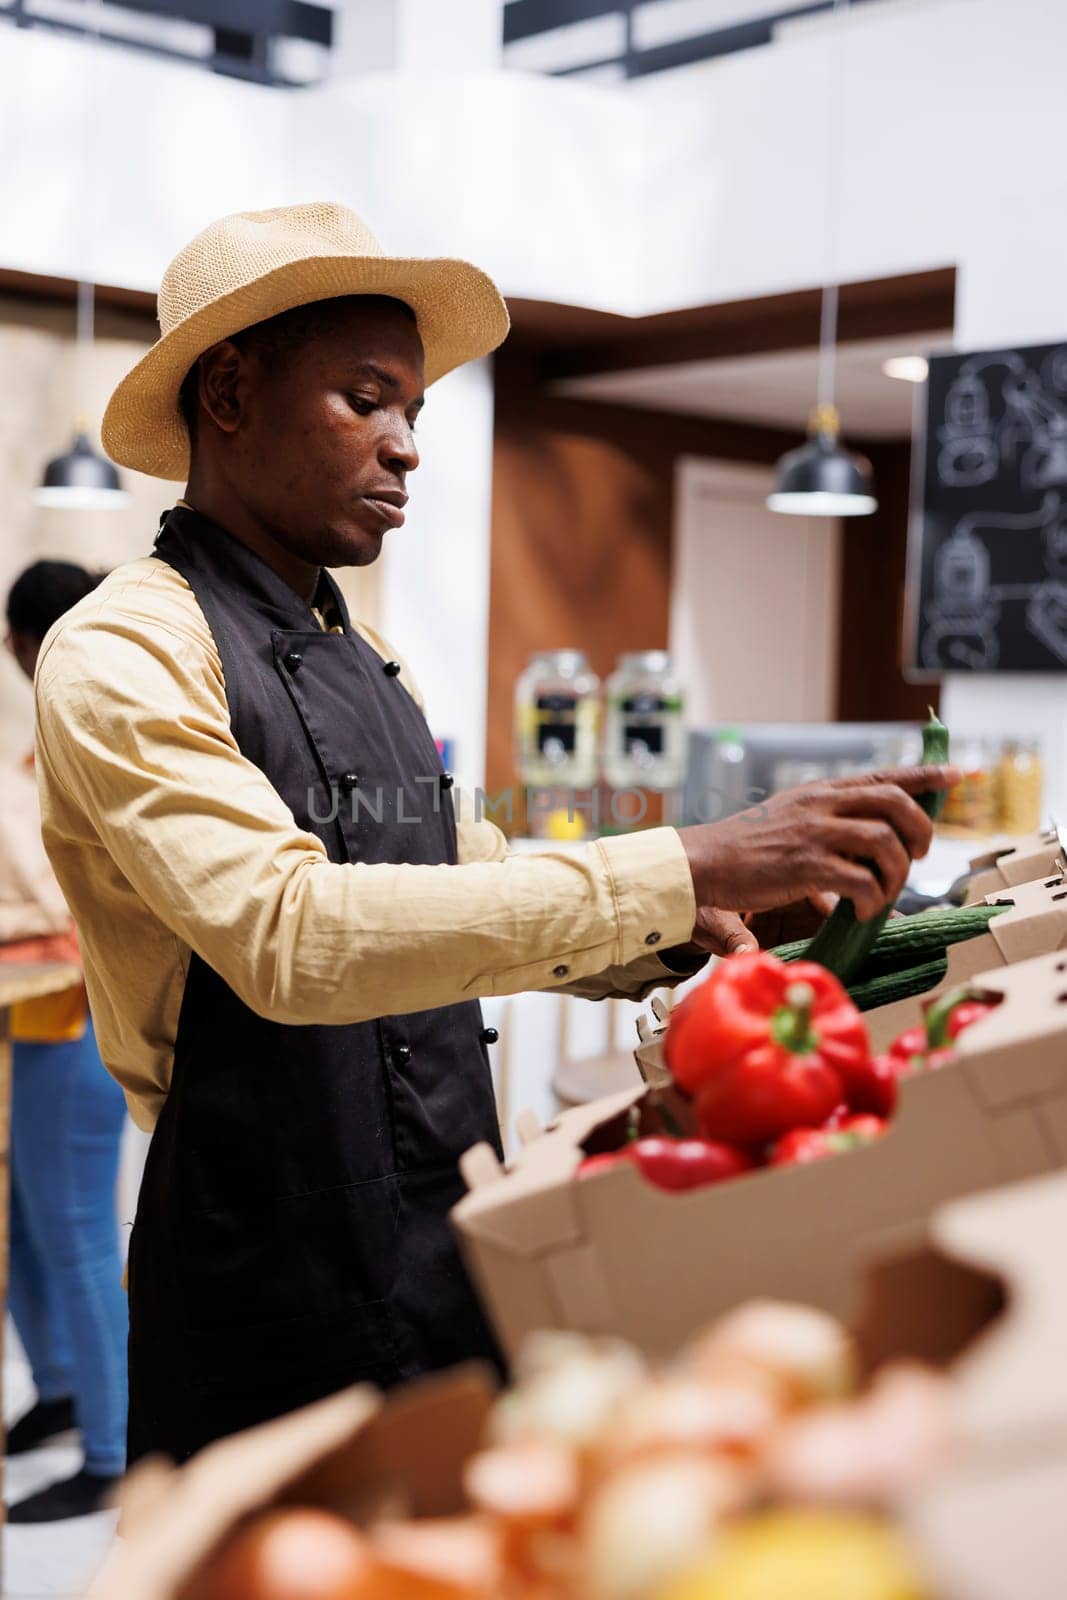 African american man with an apron organizing bio fruits and vegetables in the local supermarket. Selective focus on vibrant red peppers, cucumbers, and onions positioned on shelves.